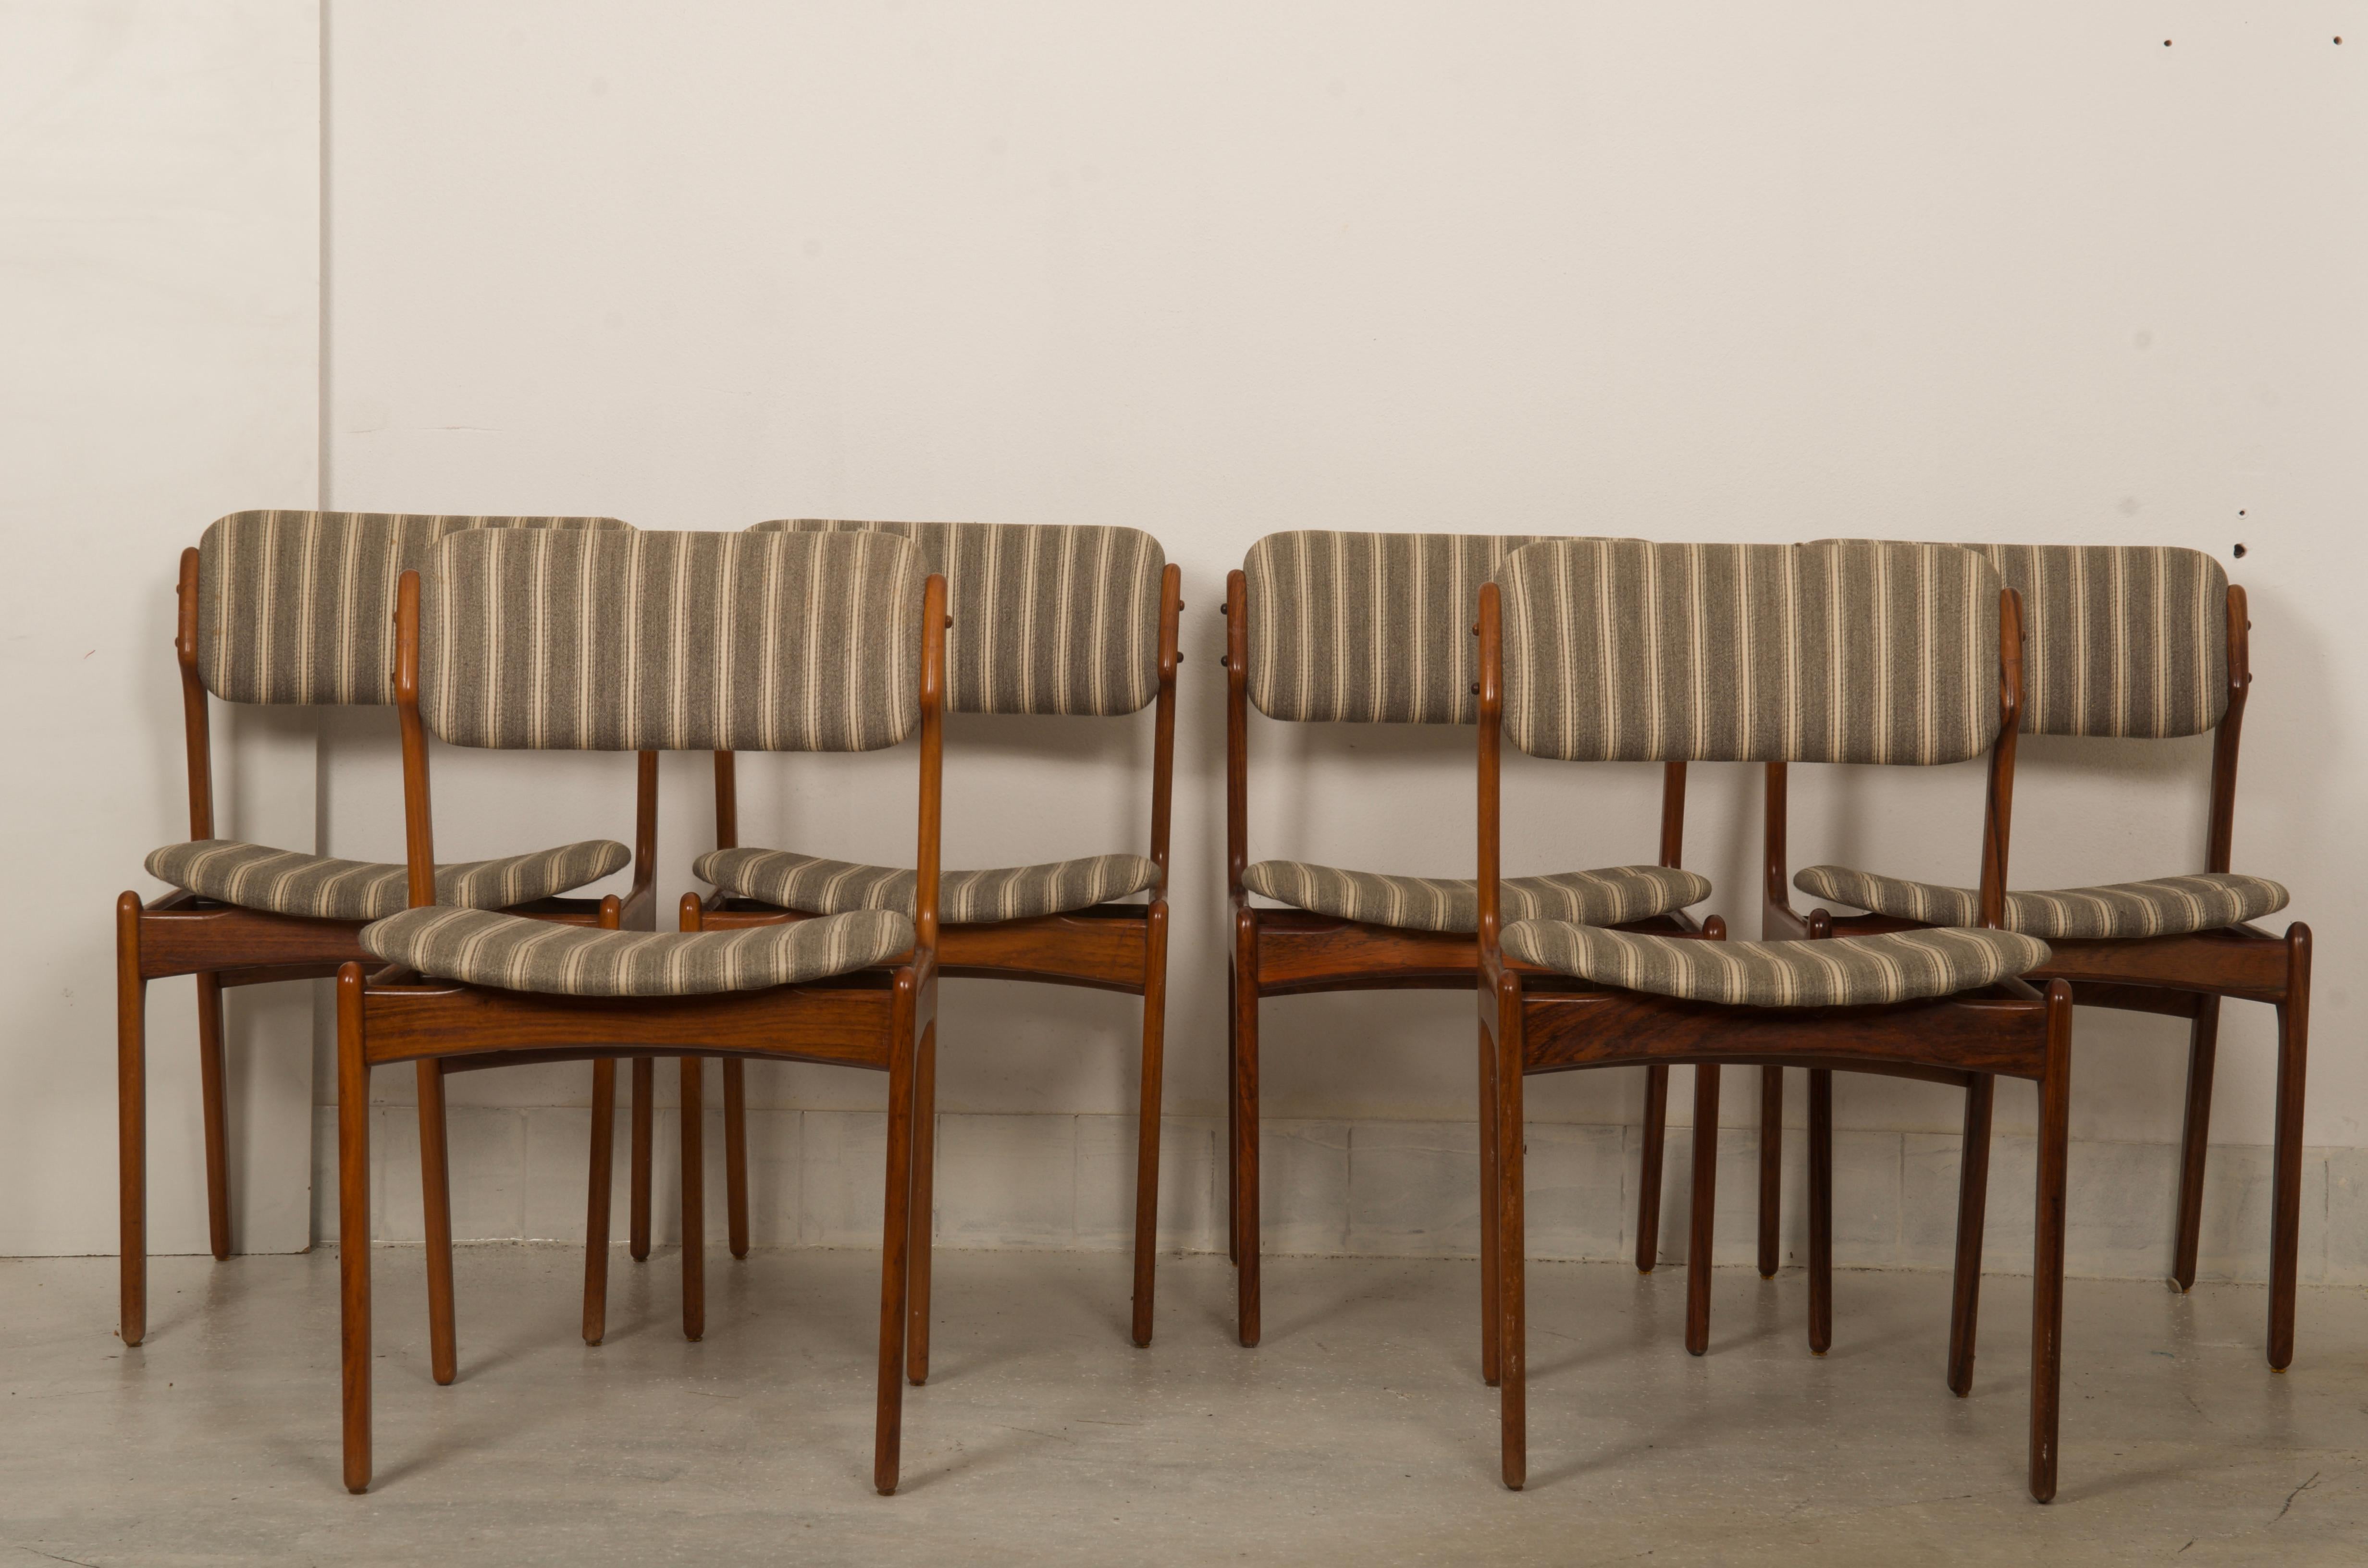 Set of six hardwood dining chairs designed by Erik Buck in the 1960s and produced by Oddense maskinsnedkeri A/S in Denmark.